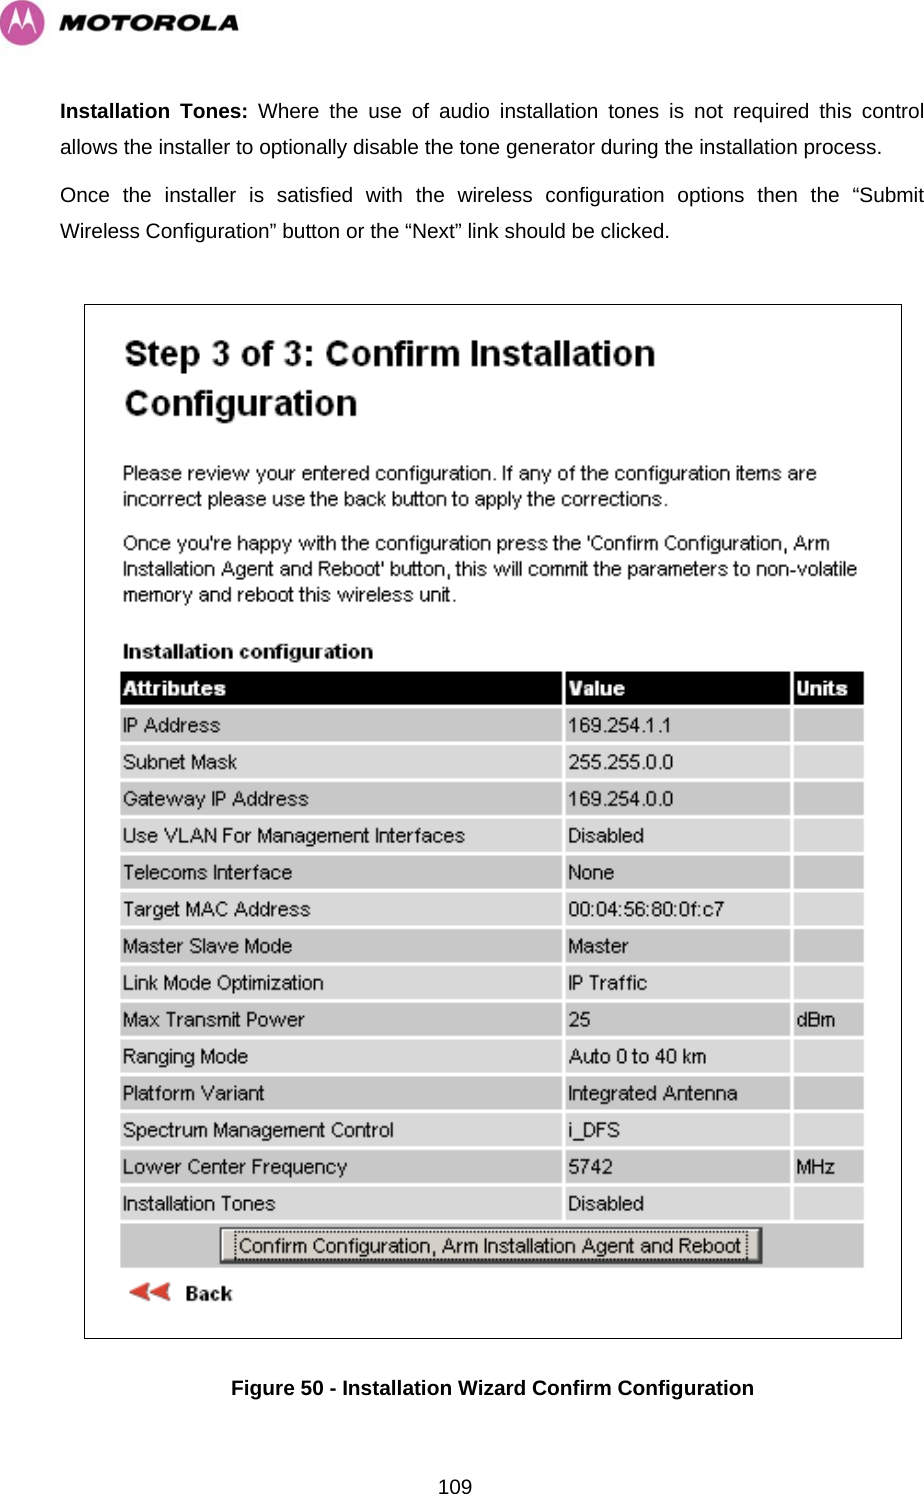   109Installation Tones: Where the use of audio installation tones is not required this control allows the installer to optionally disable the tone generator during the installation process. Once the installer is satisfied with the wireless configuration options then the “Submit Wireless Configuration” button or the “Next” link should be clicked.   Figure 50 - Installation Wizard Confirm Configuration  